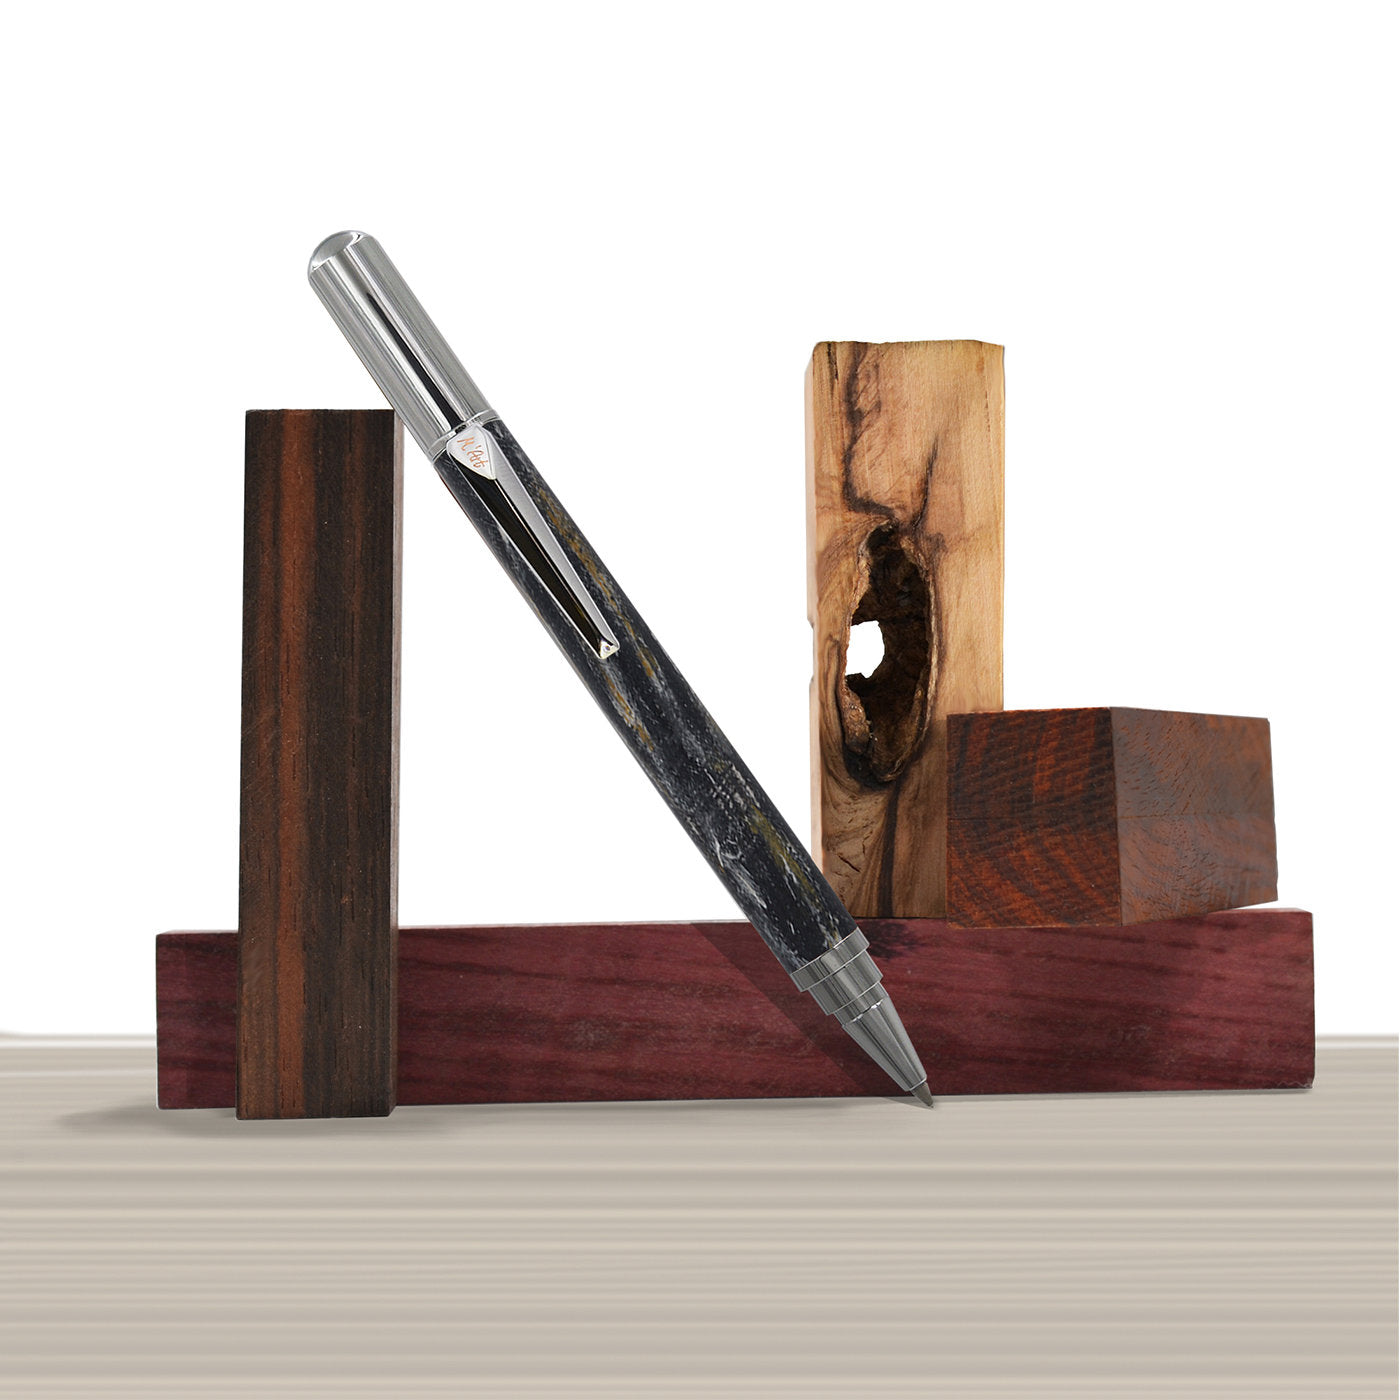 Matera Marbled Black Roller Pen in Olive Wood - Alternative view 2